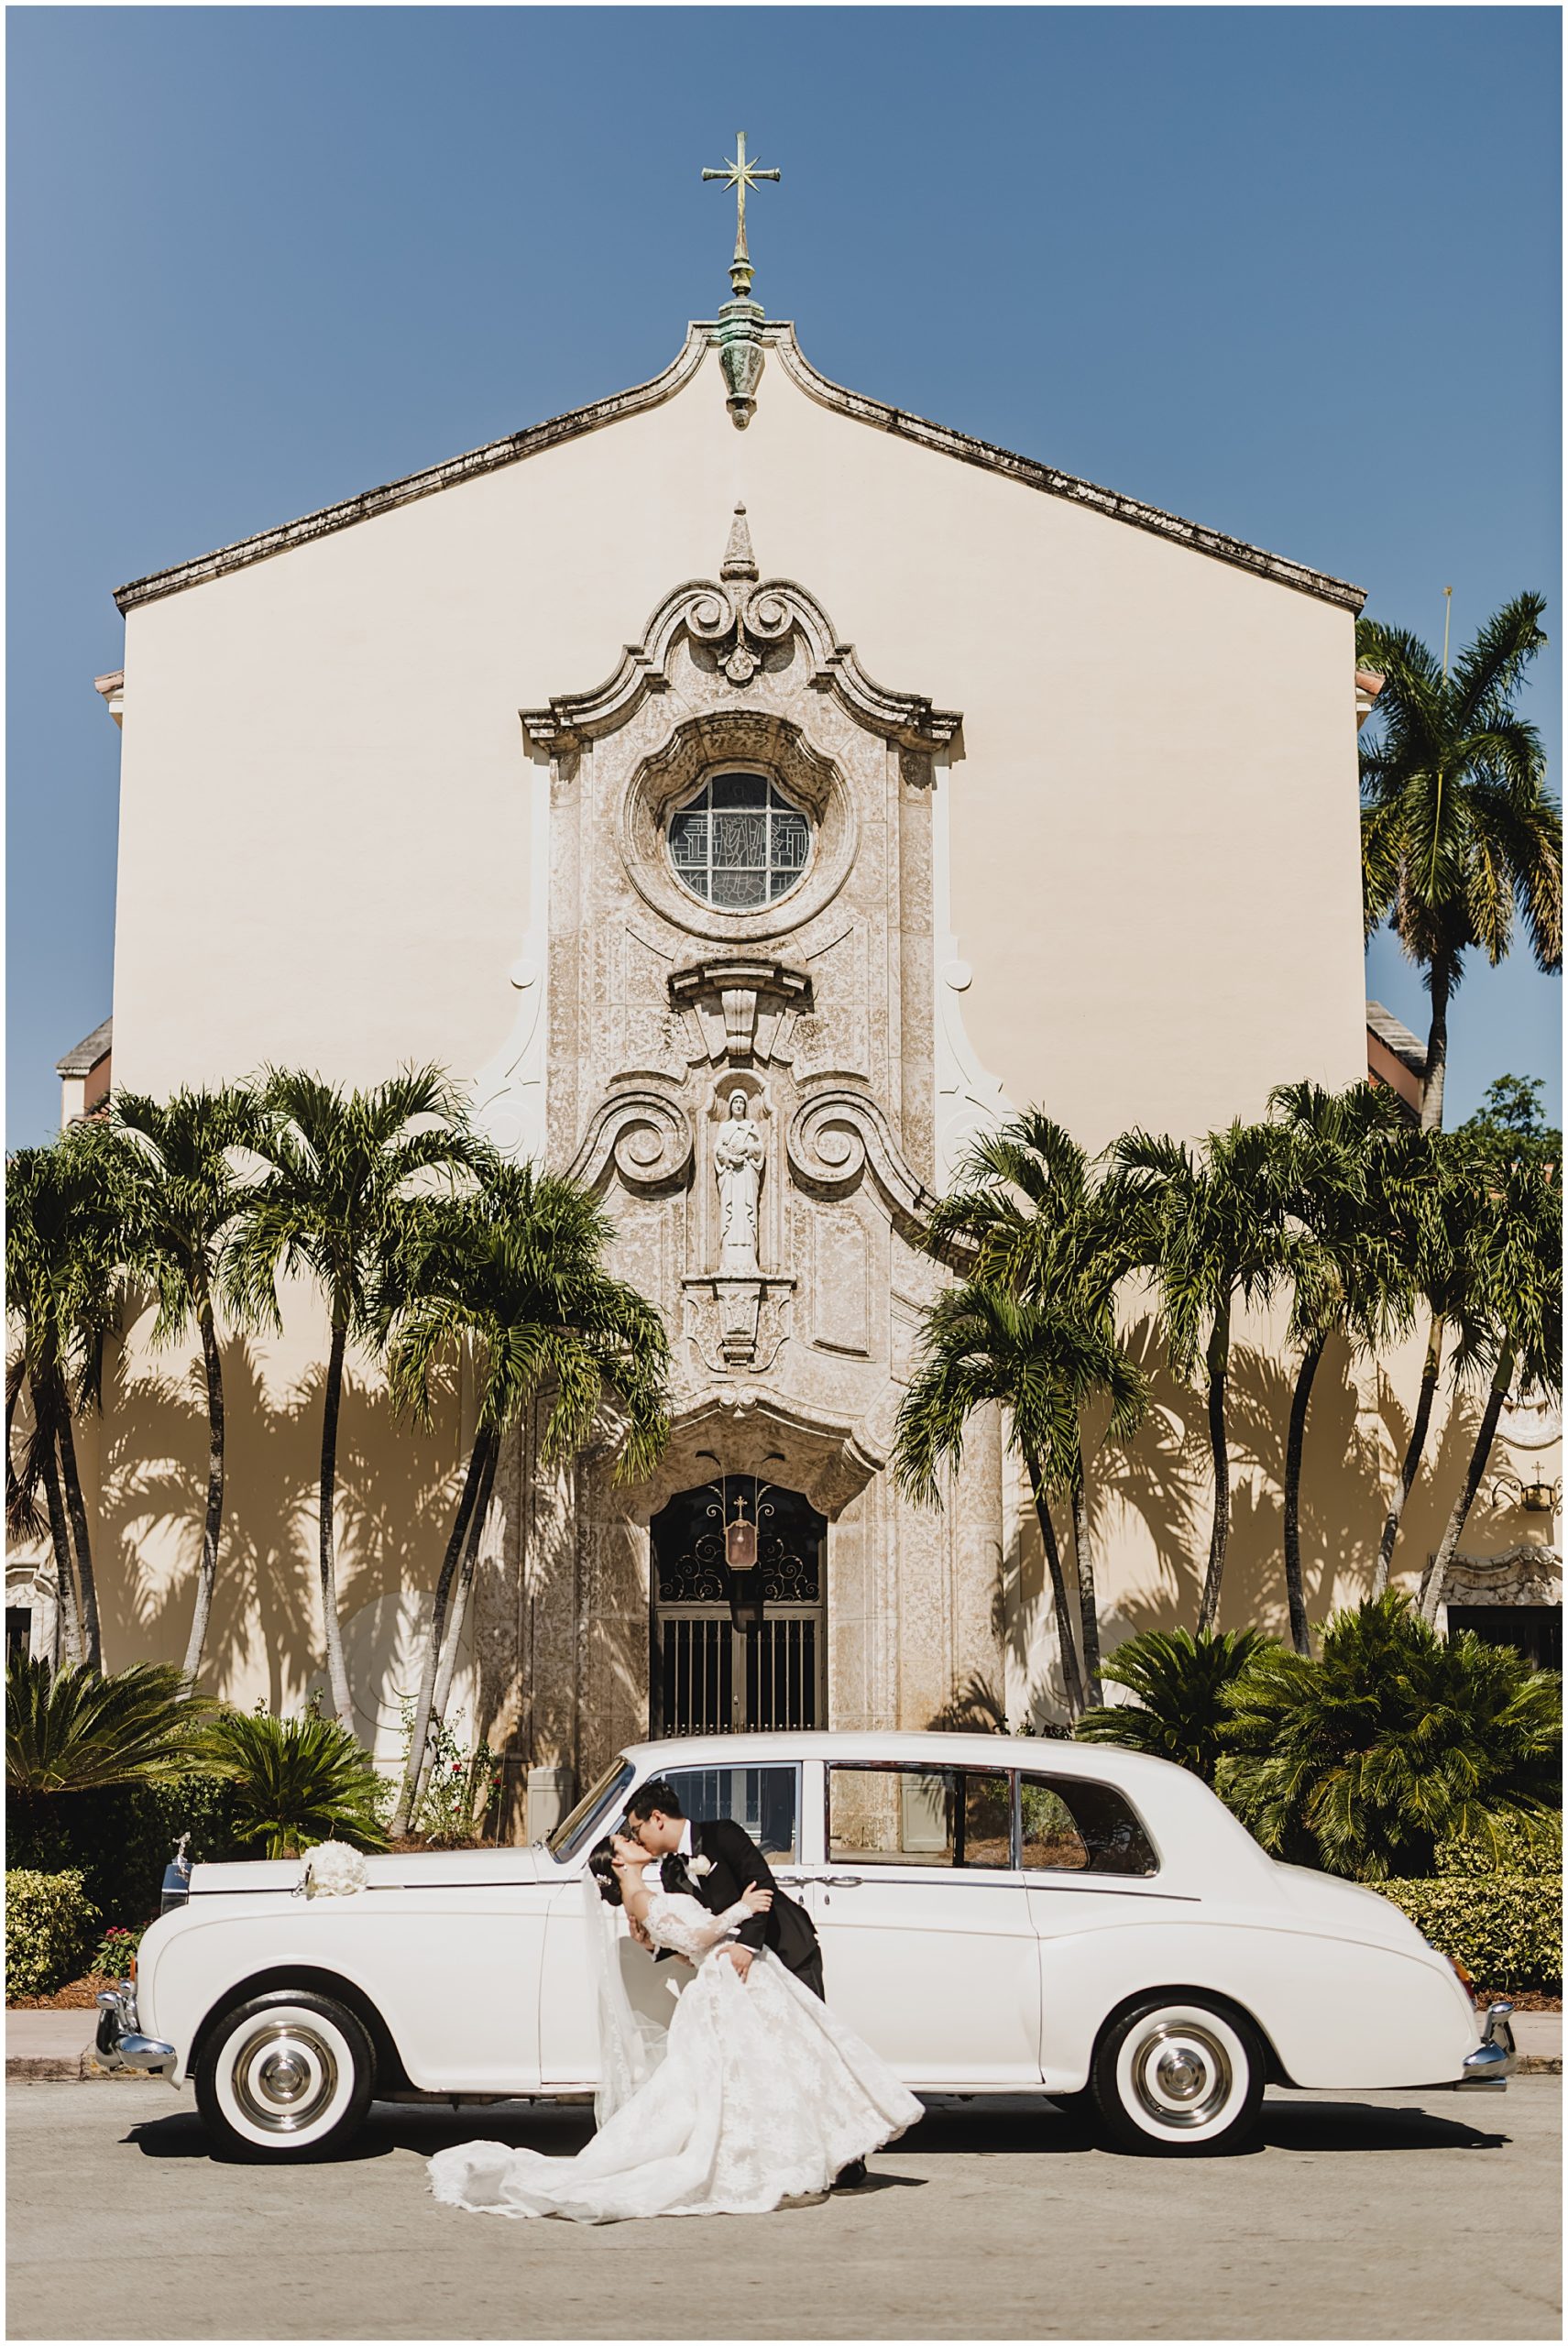 Couple posing in front of Church of the Little Flower and classic car.